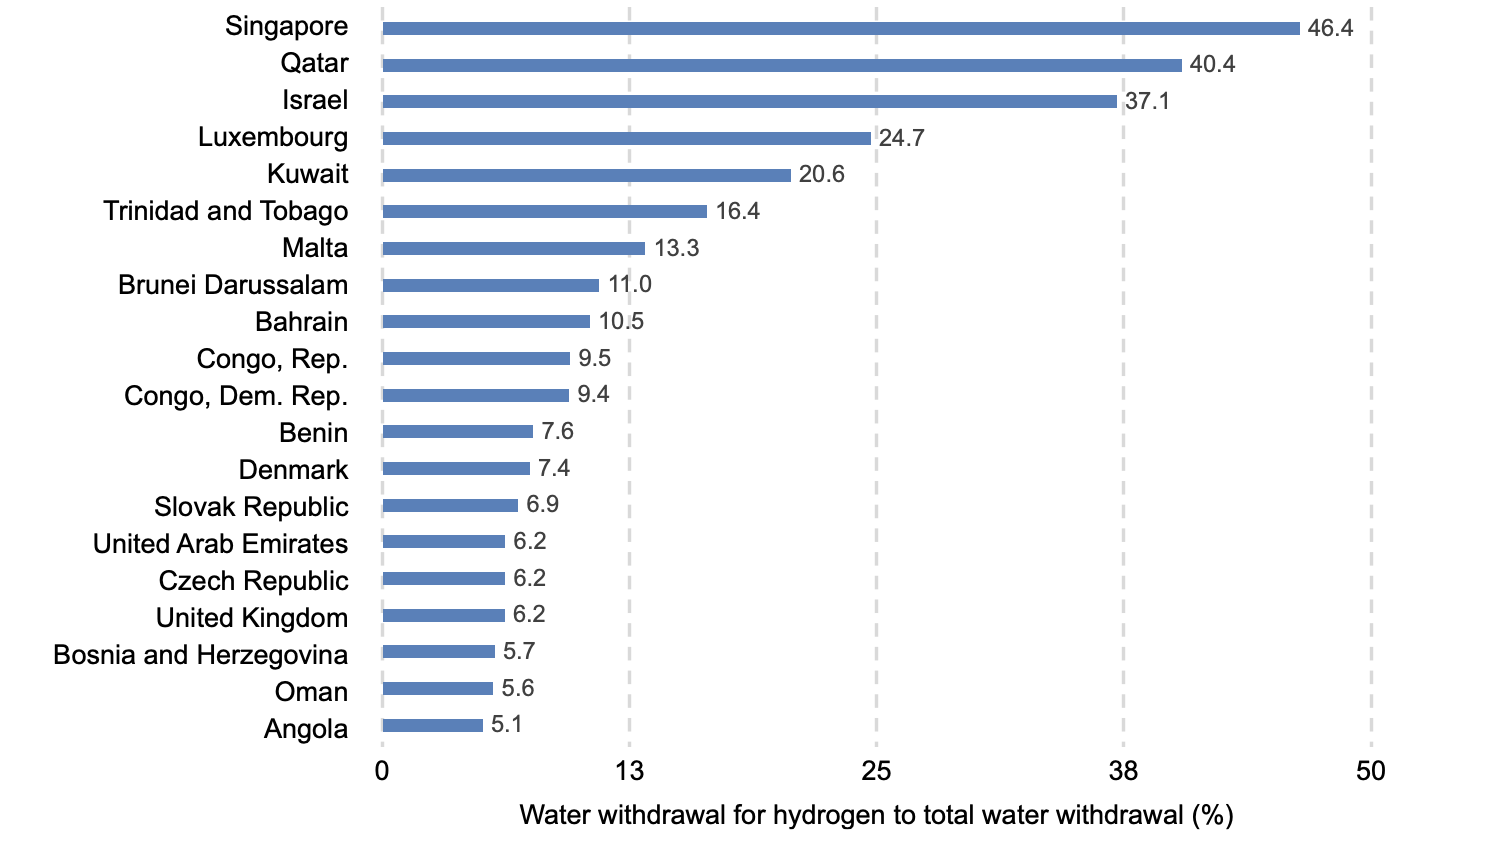 Hydrogen to total water withdrawal